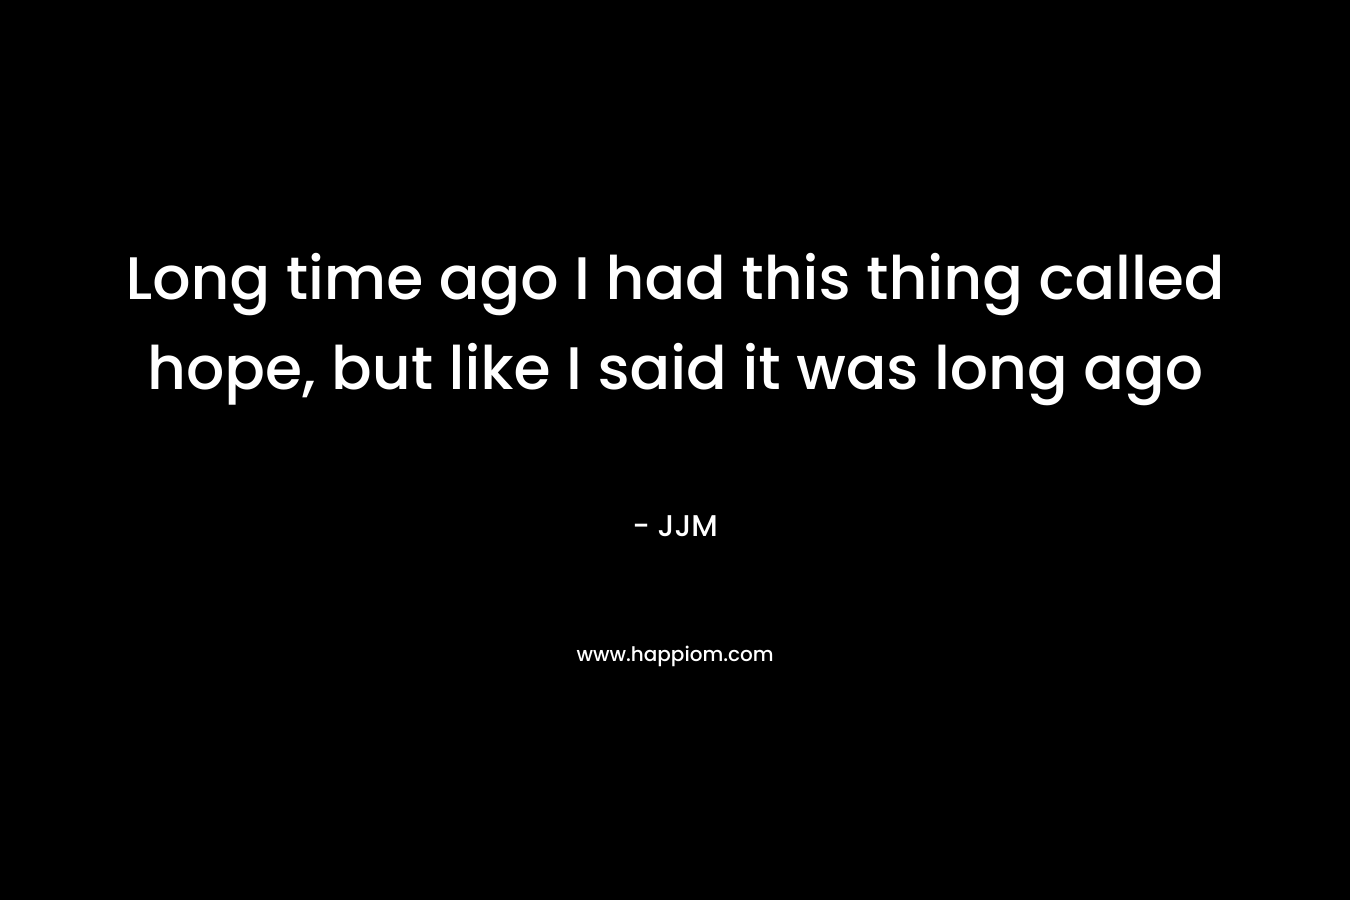 Long time ago I had this thing called hope, but like I said it was long ago – JJM